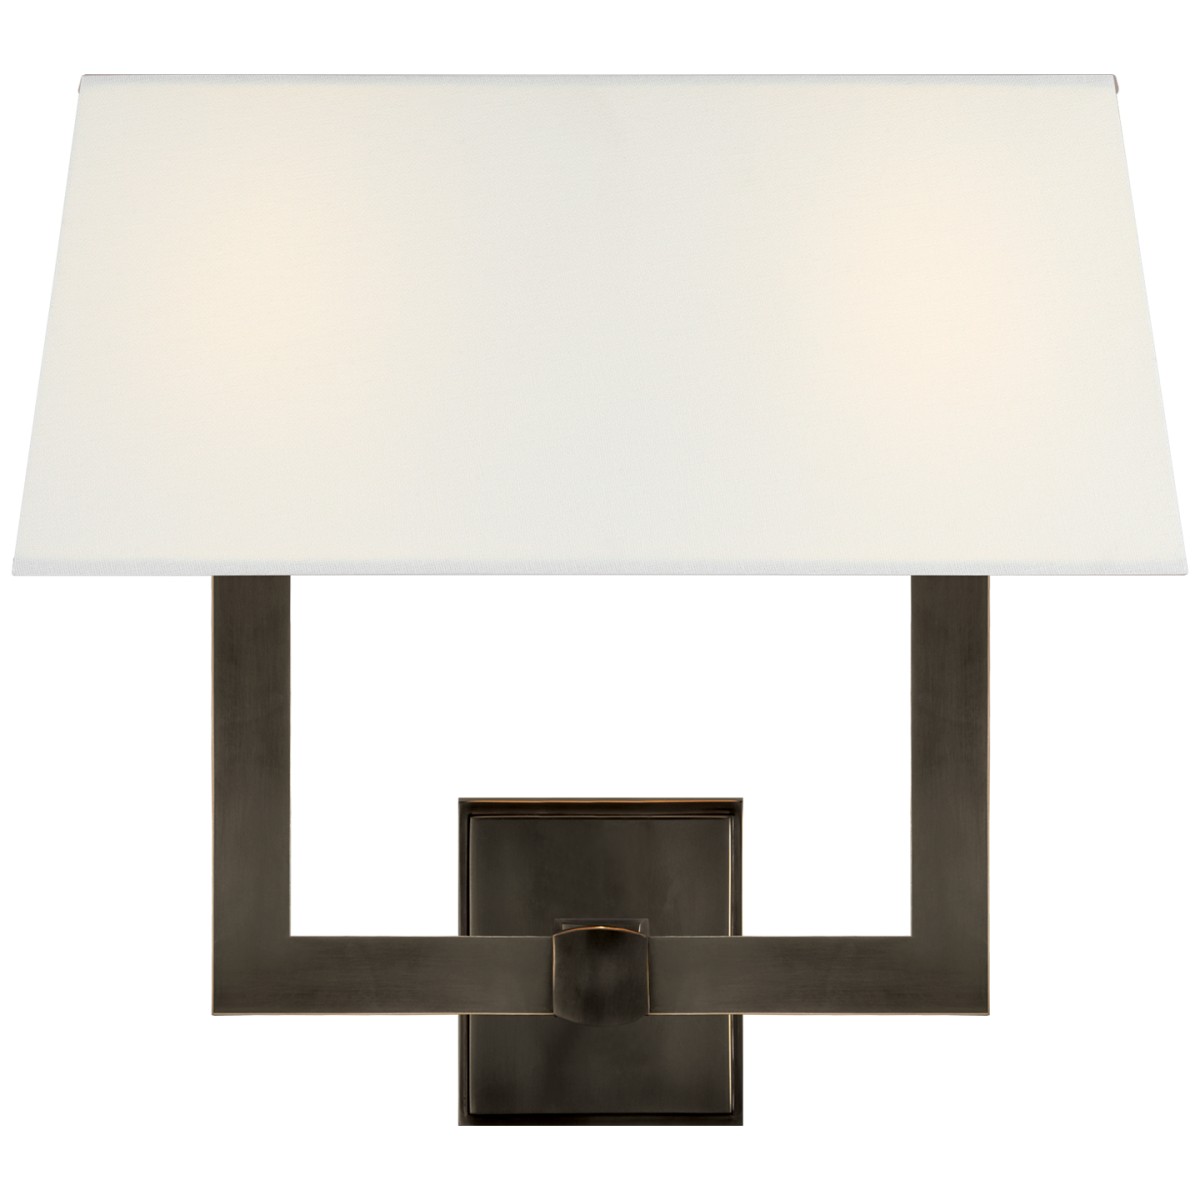 Square Tube Double Sconce with Single Shade